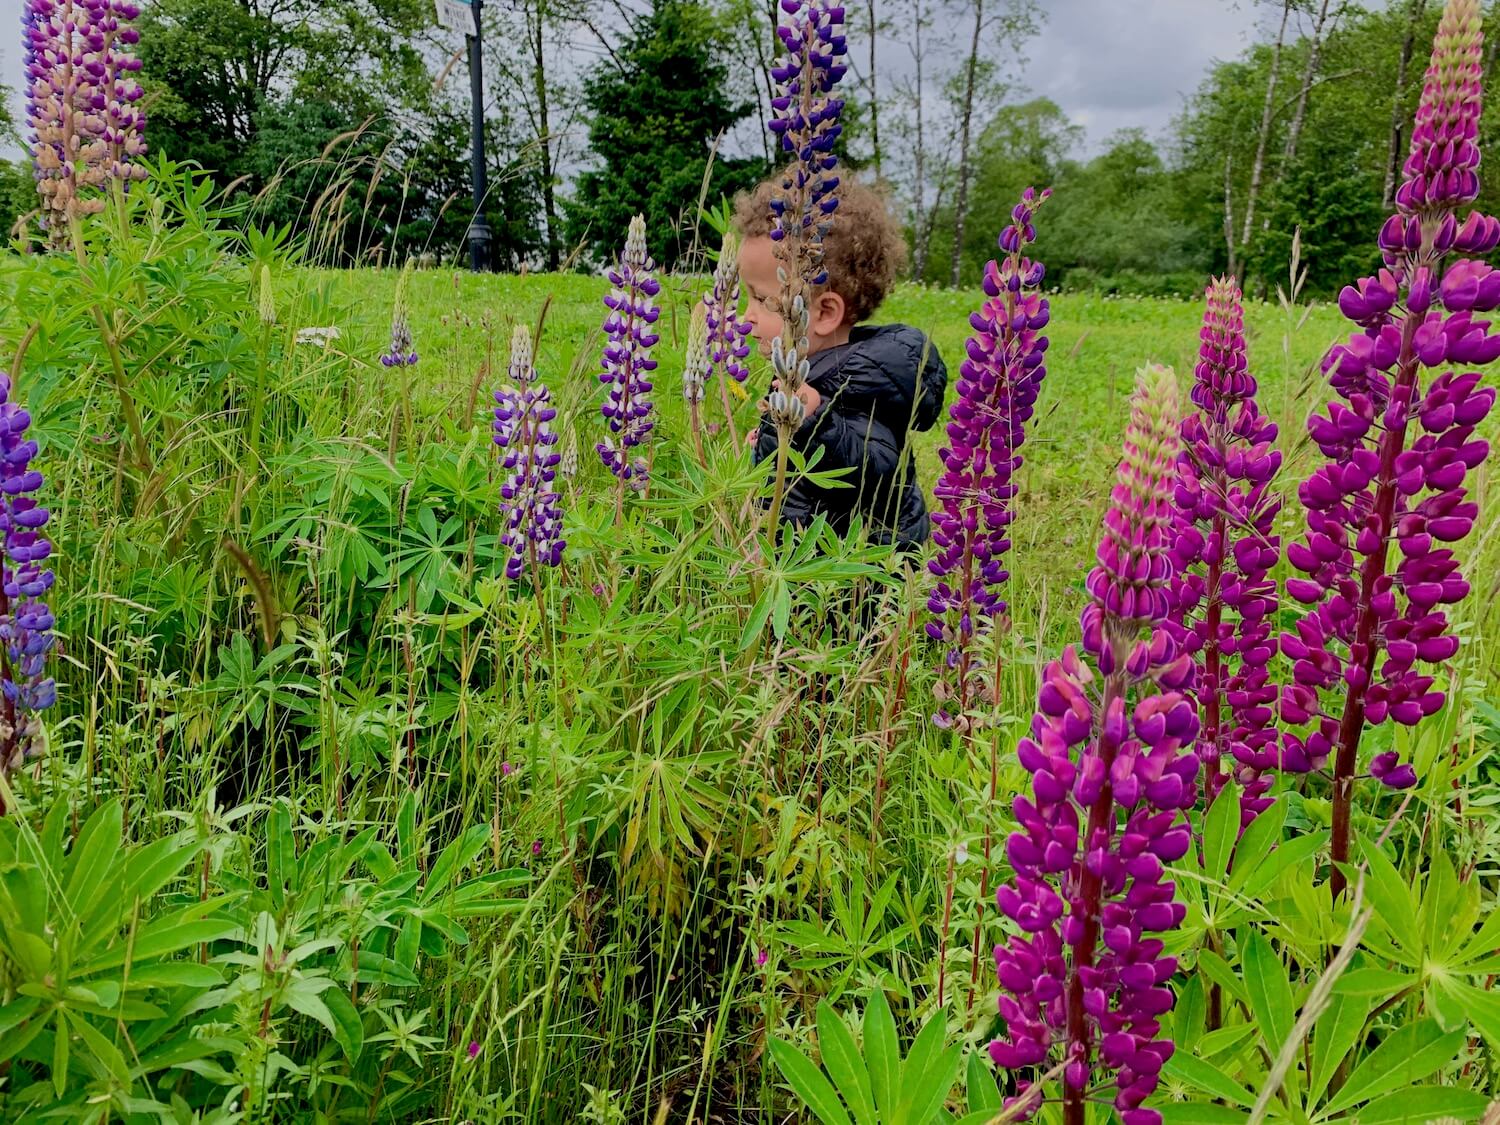 A small child with brown curly hair and a black coat frolics in a field of purple lupine rising up from the richly colored green grass. This is part of the Hoquarten Interpretive Trail in Tillamook, Oregon.